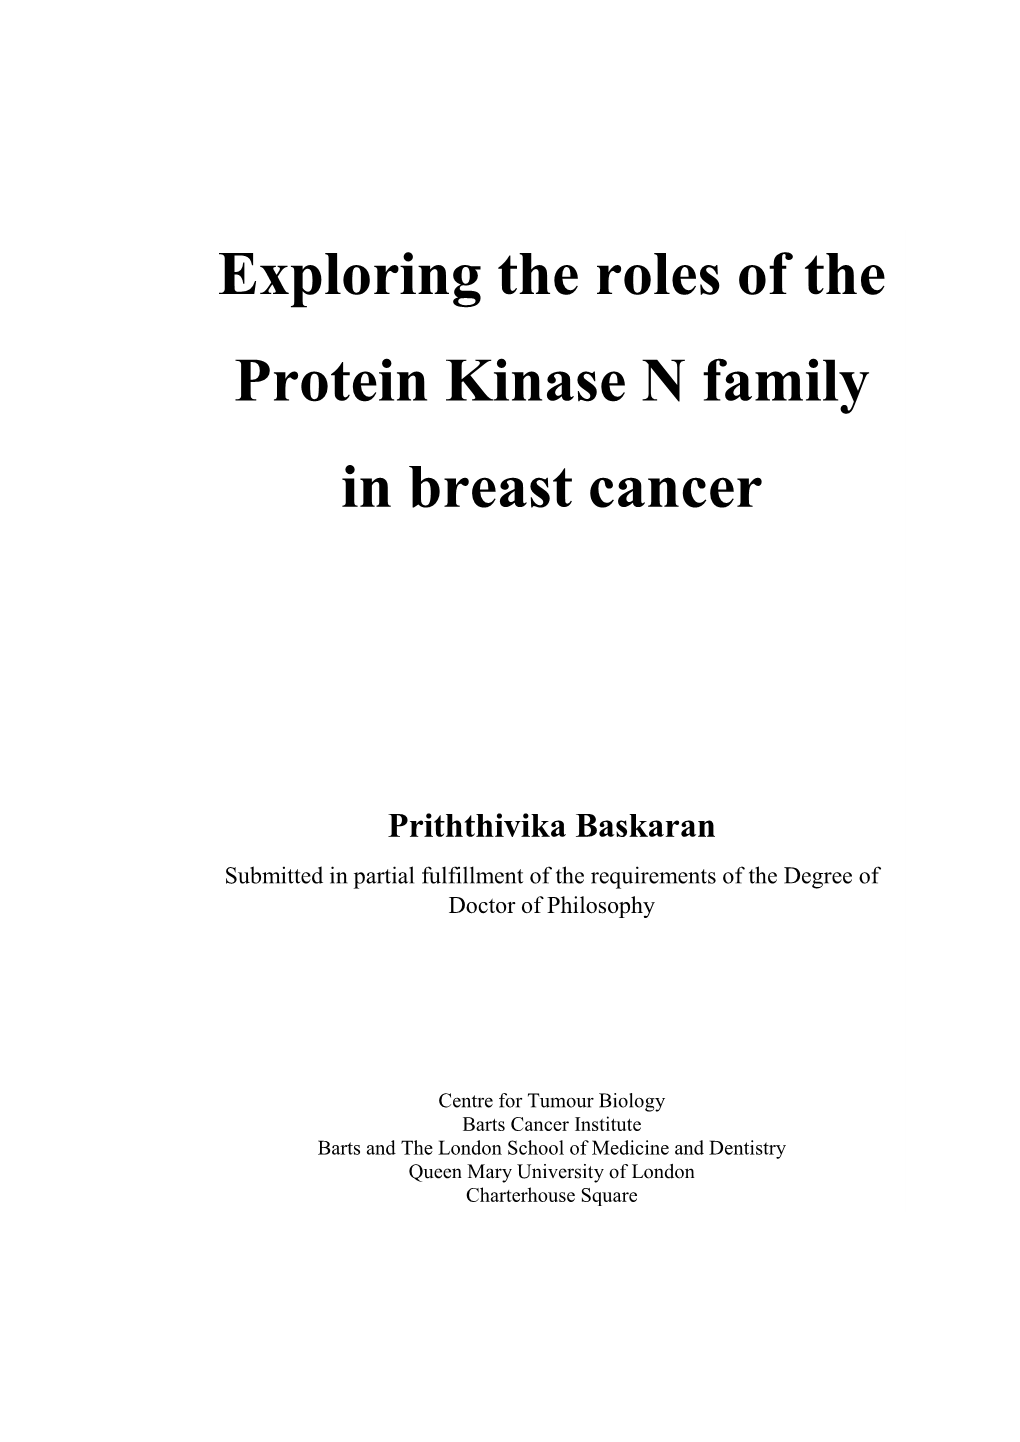 Exploring the Roles of the Protein Kinase N Family in Breast Cancer